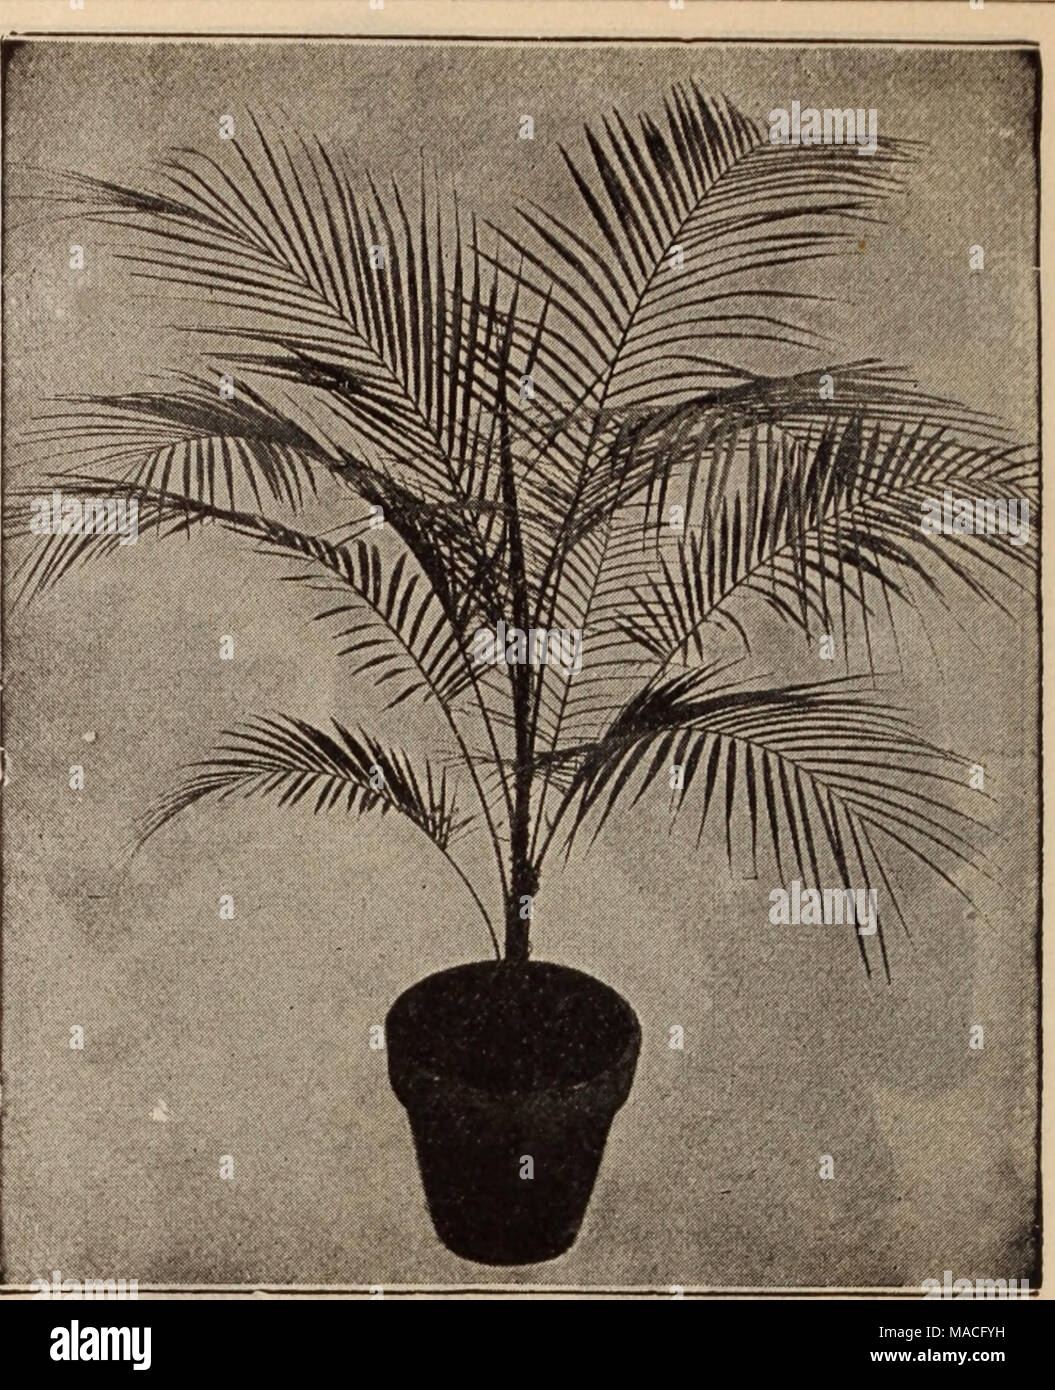 . Dreer's wholesale price list / Henry A. Dreer. . COCOS WEDDELIANA Bactris Major. A rare and unique Palm, interesting on account of the long spines with which both surfaces of the leaf are covered. 4-inch pots, $1.00 each. Calimeris Ciliata. A splendid collection Palm of so-termed climbing habit. 3'/z-inch pots, $3.00 each. Caryota Bla4icoii. A rare variety of the Fish-tail Palm. 4-inch pots, $2.50 per doz. Caryota Urens. 2'/i-inch pots, $1.25 per doz.; $8.00 per 100. Cocos Weddeliana. We have nearly an acre of glass devoted to this most graceful of all Palms. Splendid, thrifty stock, of rich Stock Photo